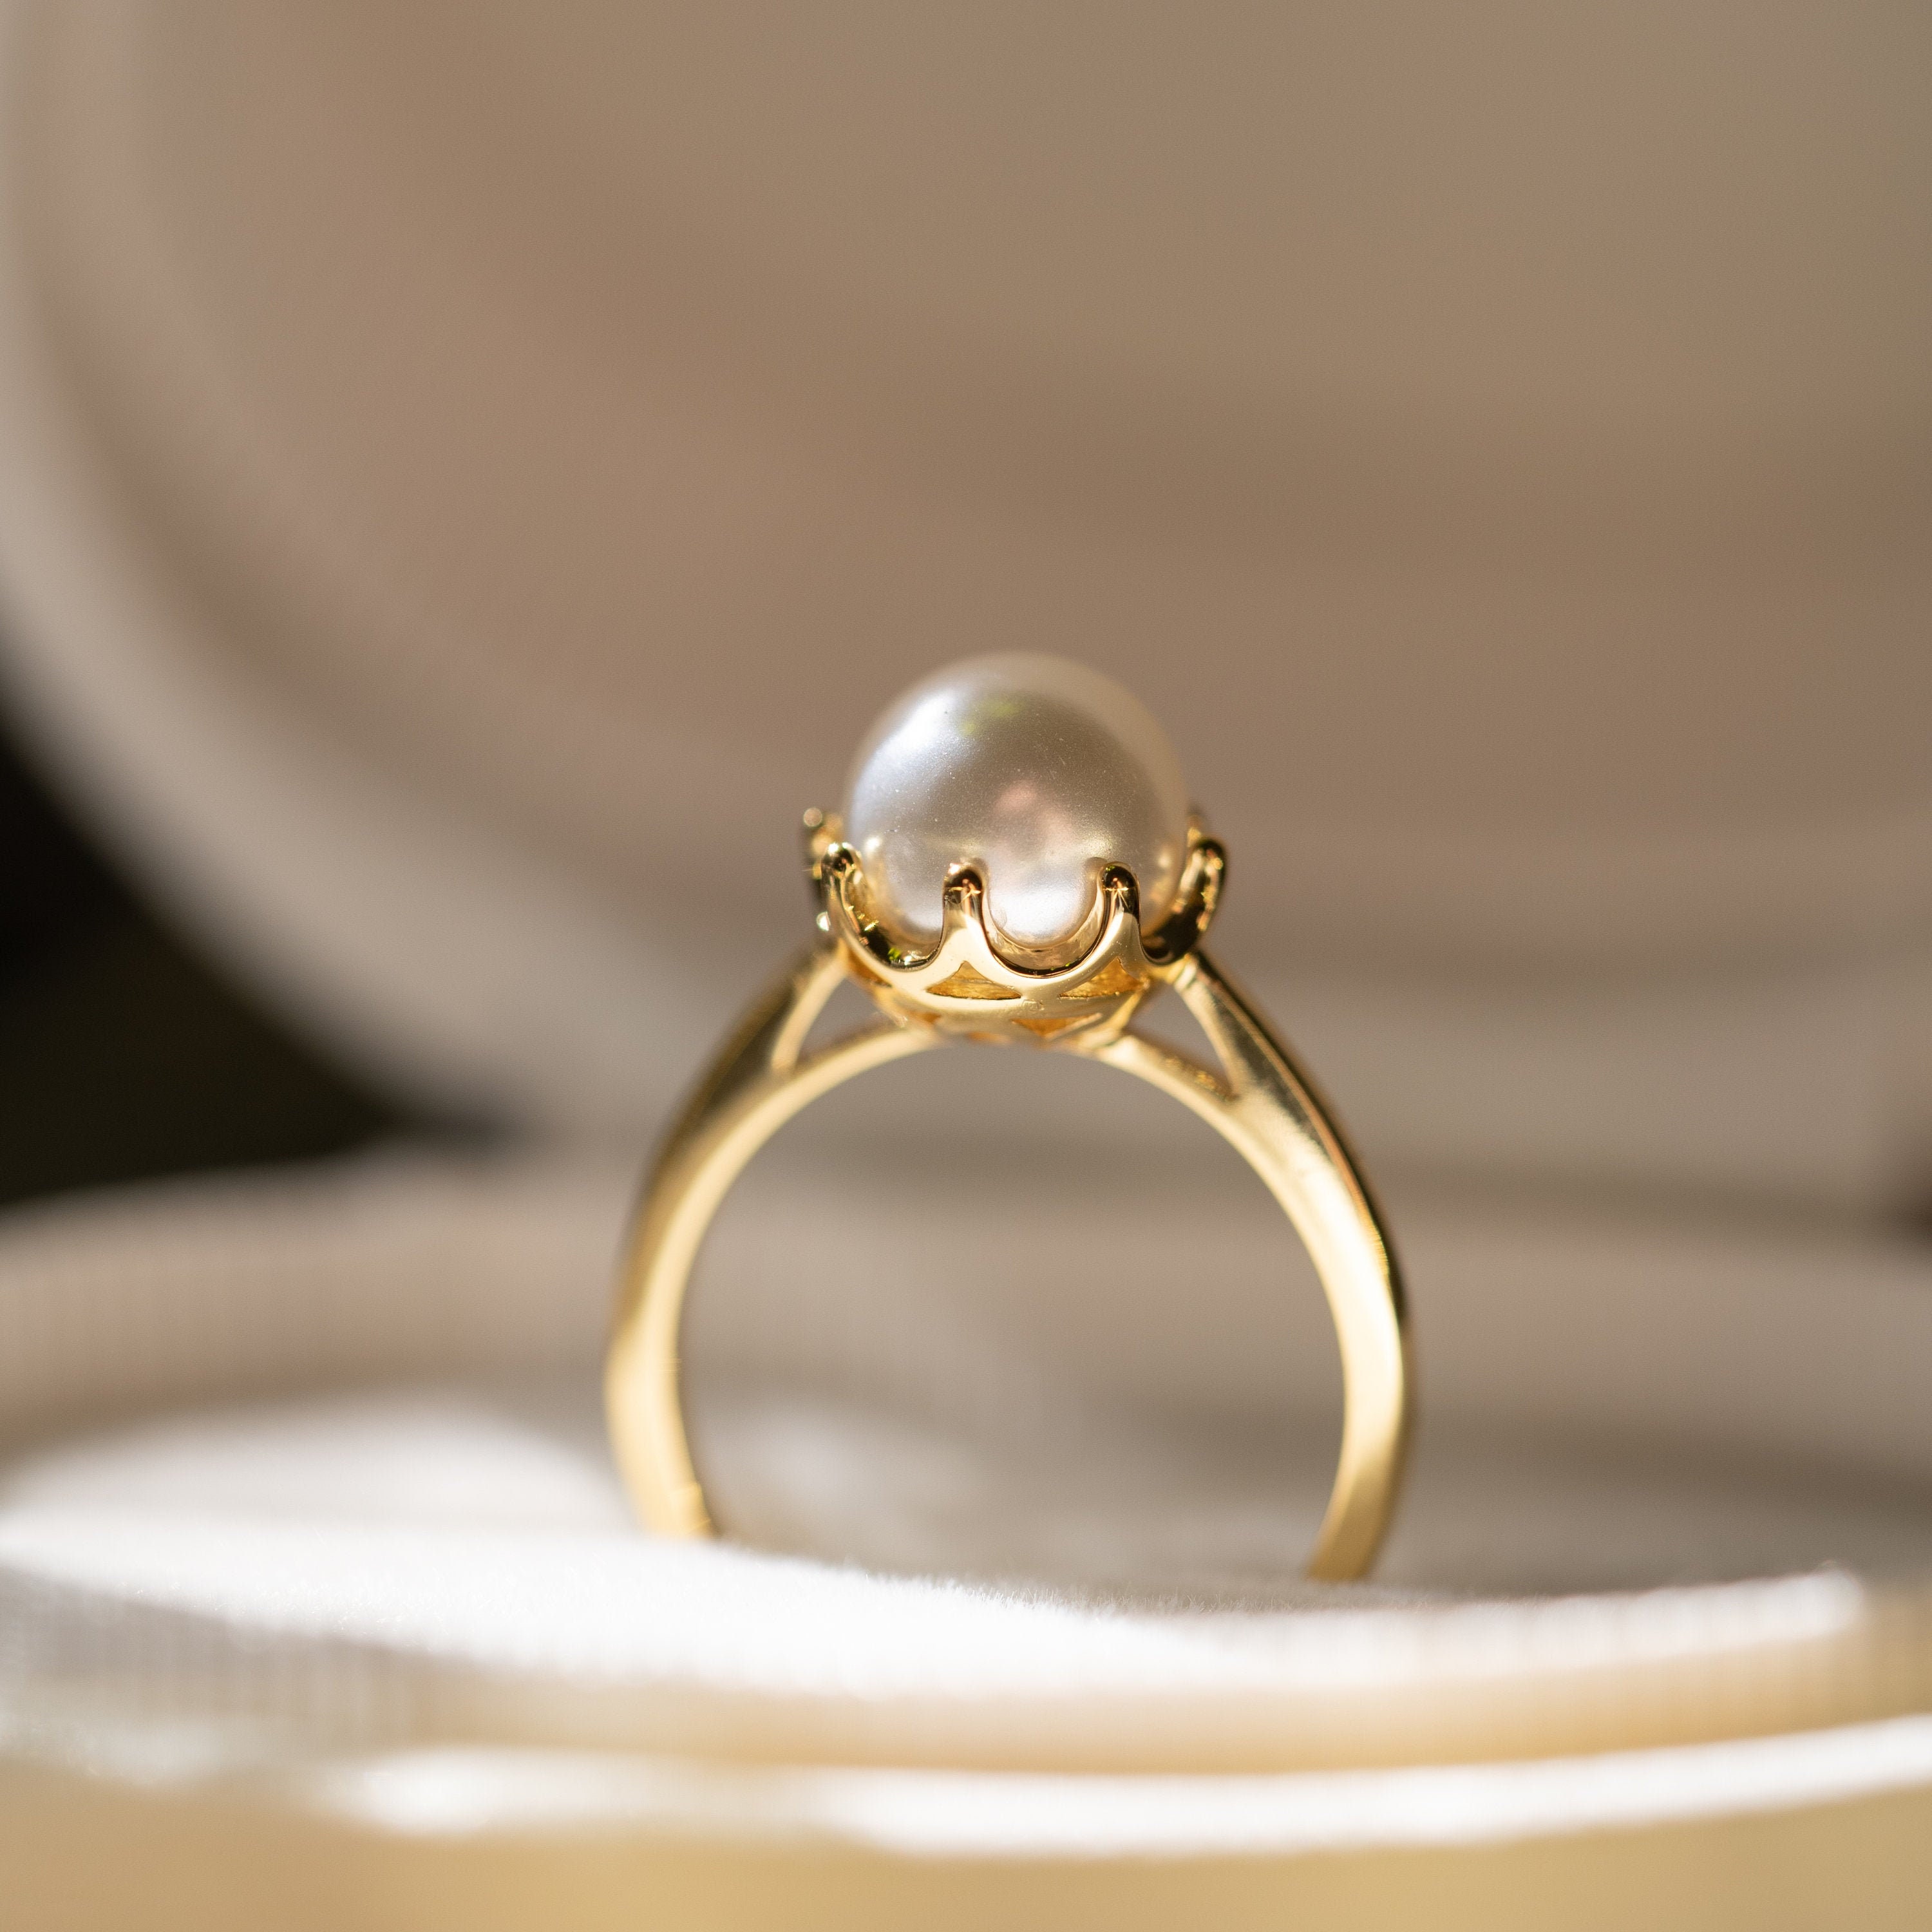 Aggregate more than 127 pearl ring gold super hot